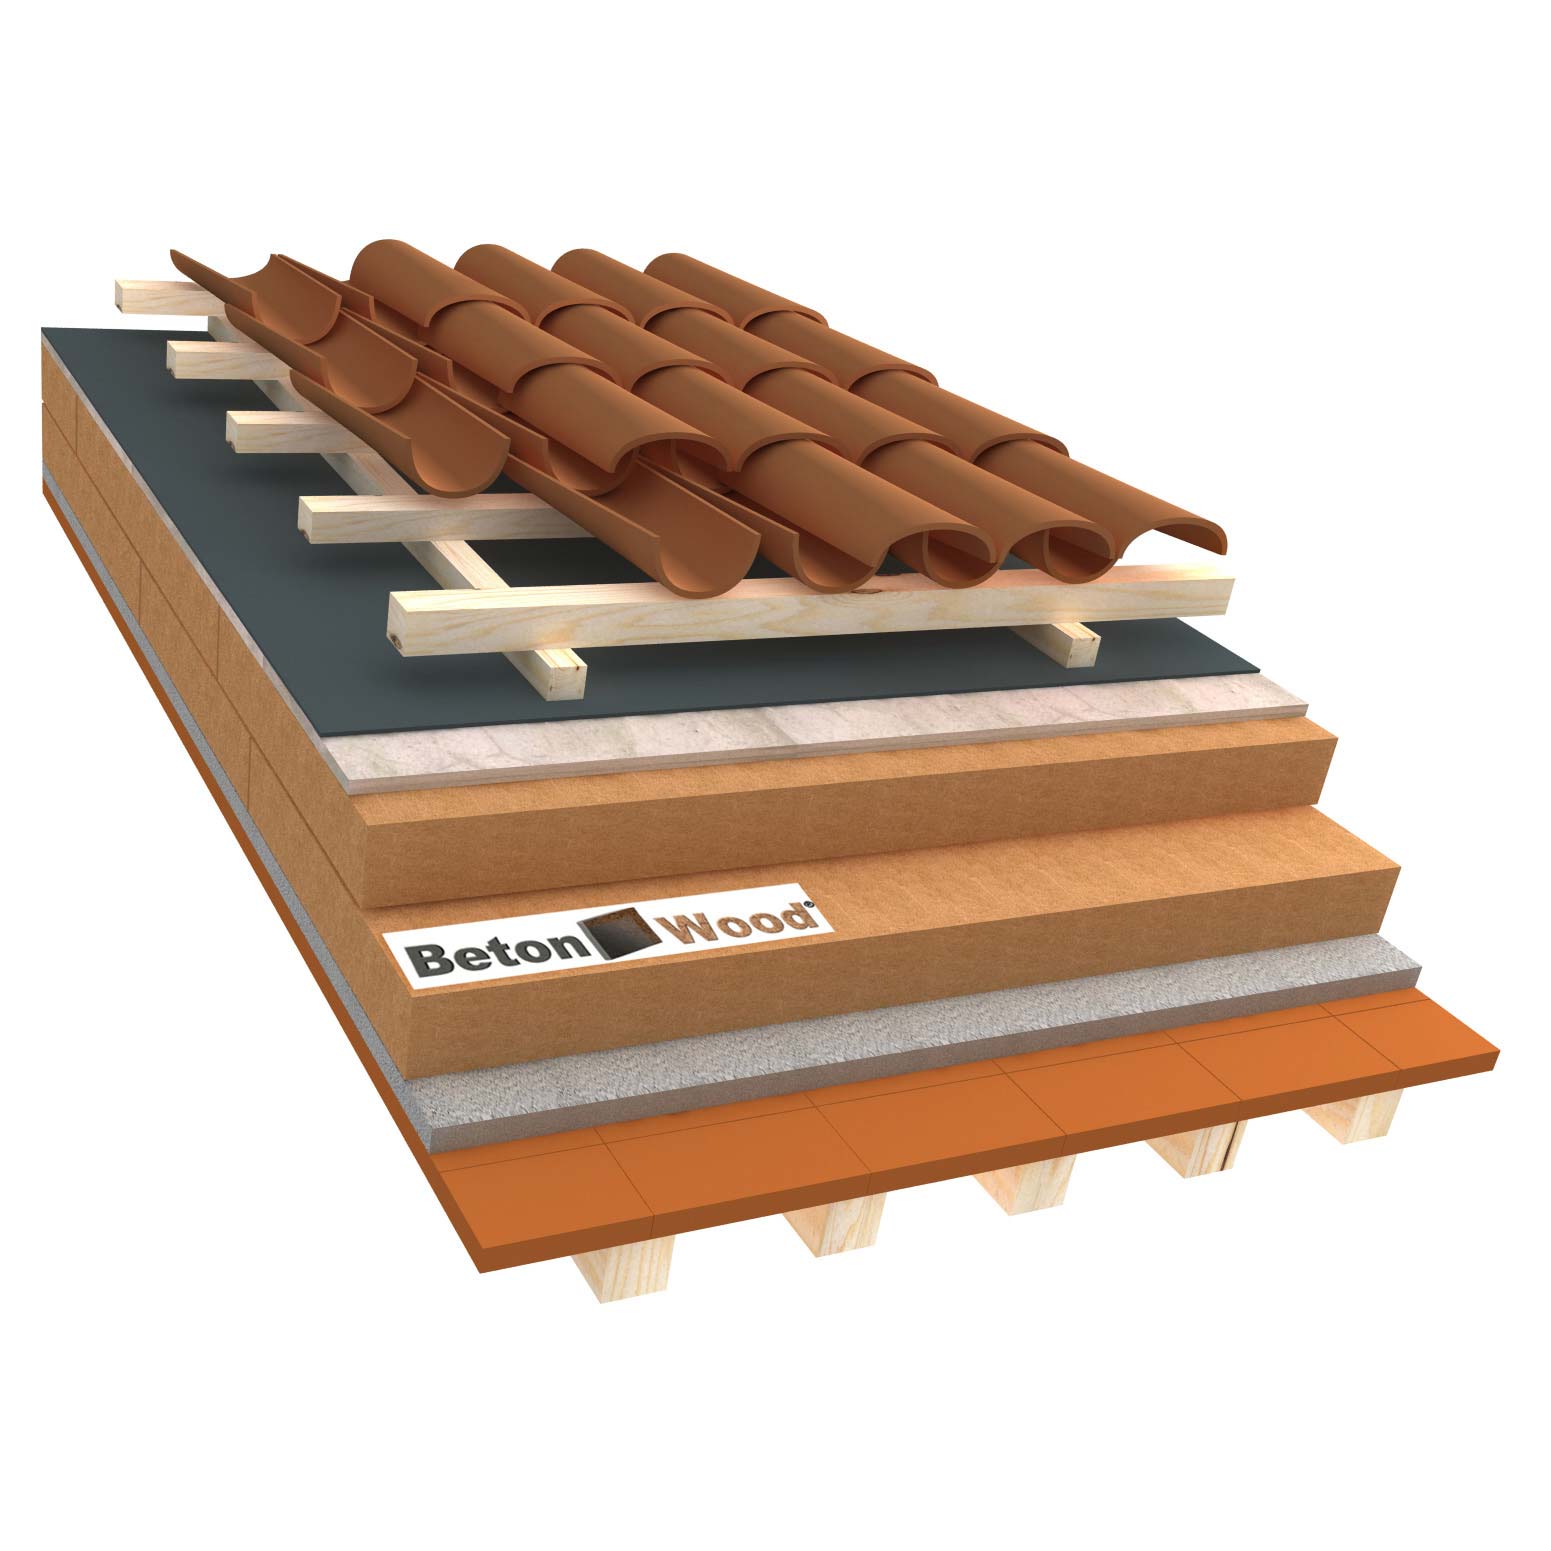 Ventilated roof with wood fiber Therm SD and cement bonded particle boards on terracotta tiles